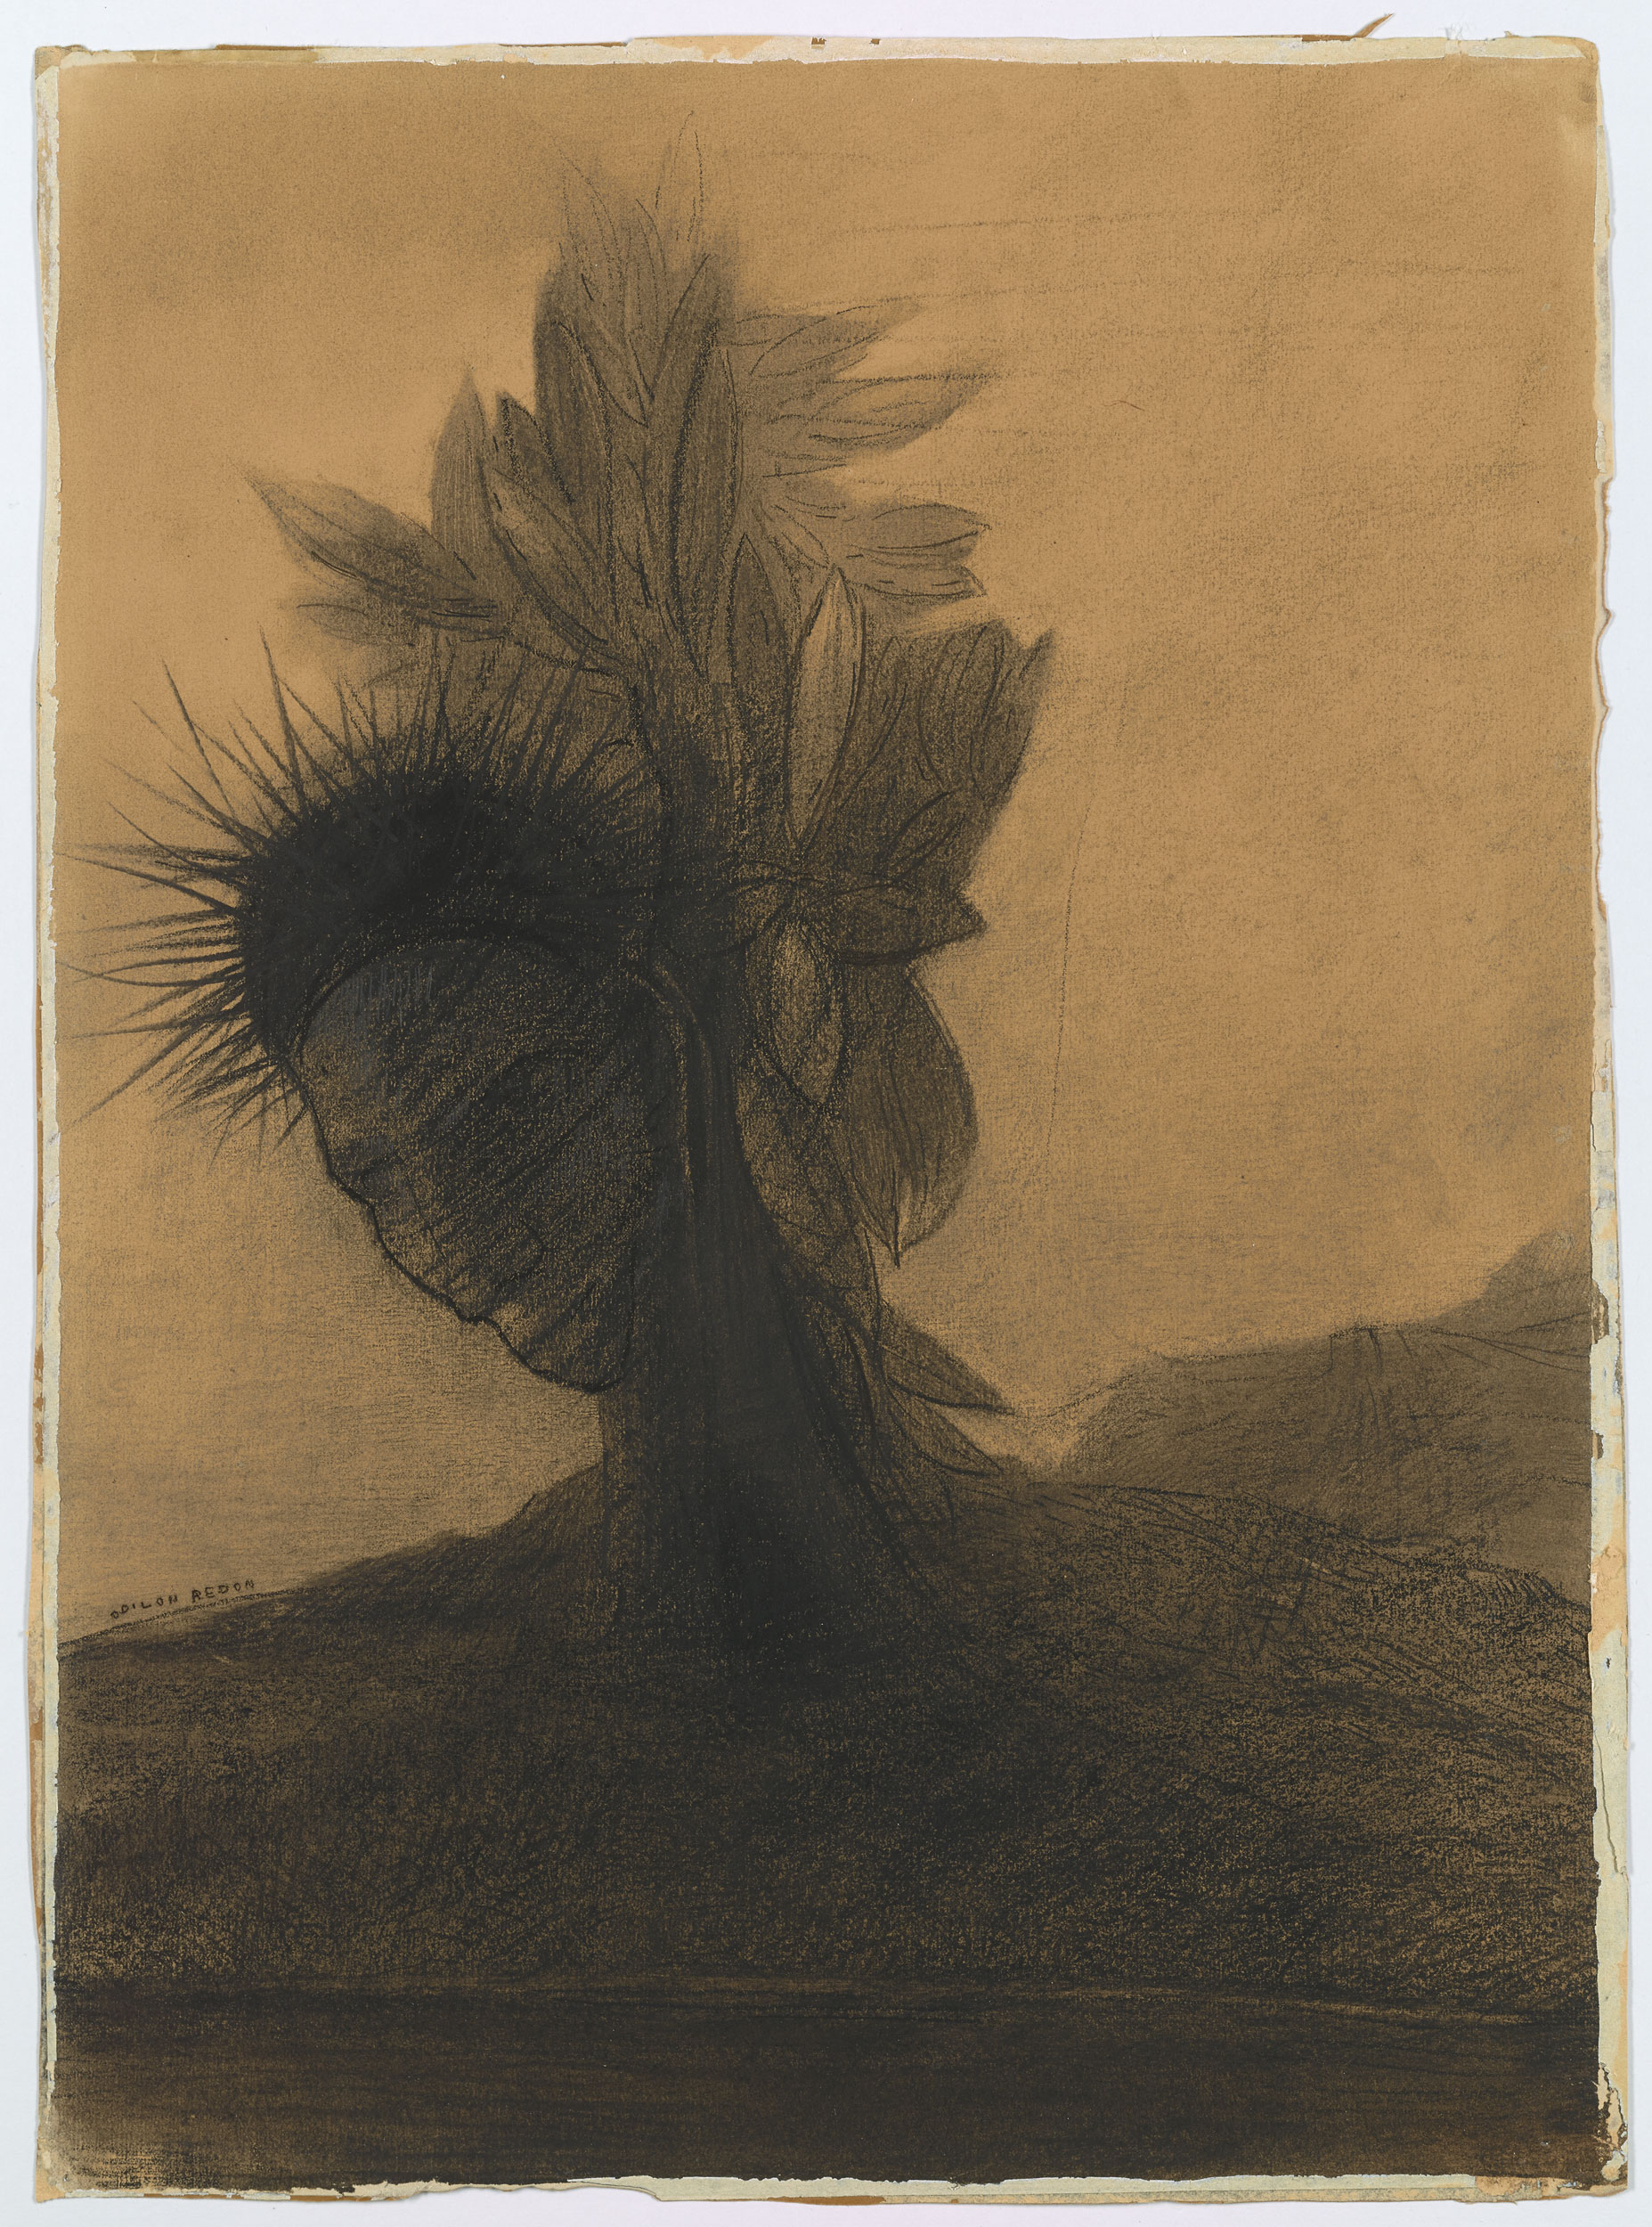 Odilon Redon | The Tree Man | Drawings Online | The Morgan Library & Museum